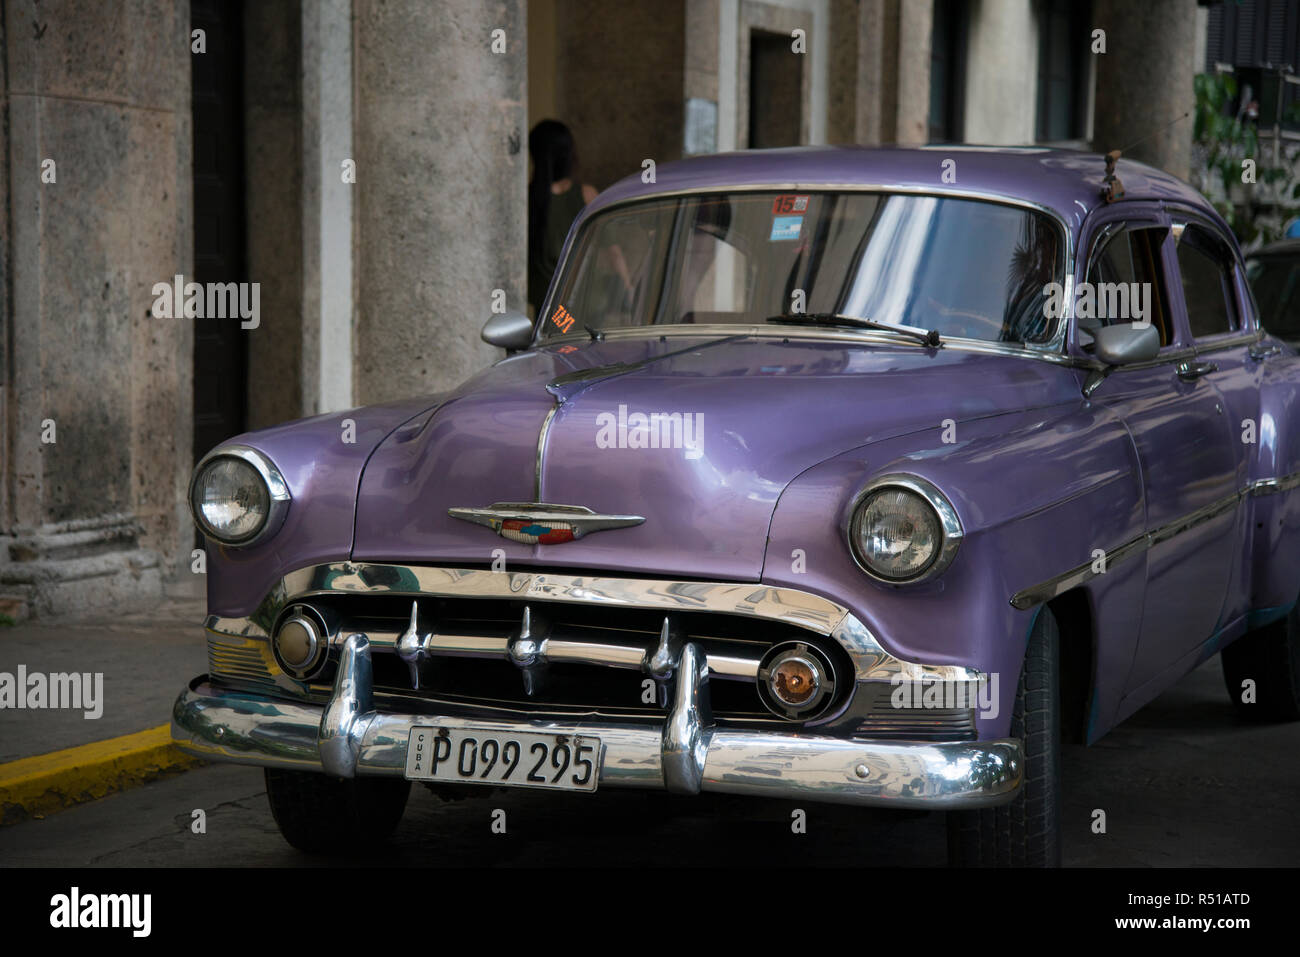 Old Chevy painted violet purple. Stock Photo